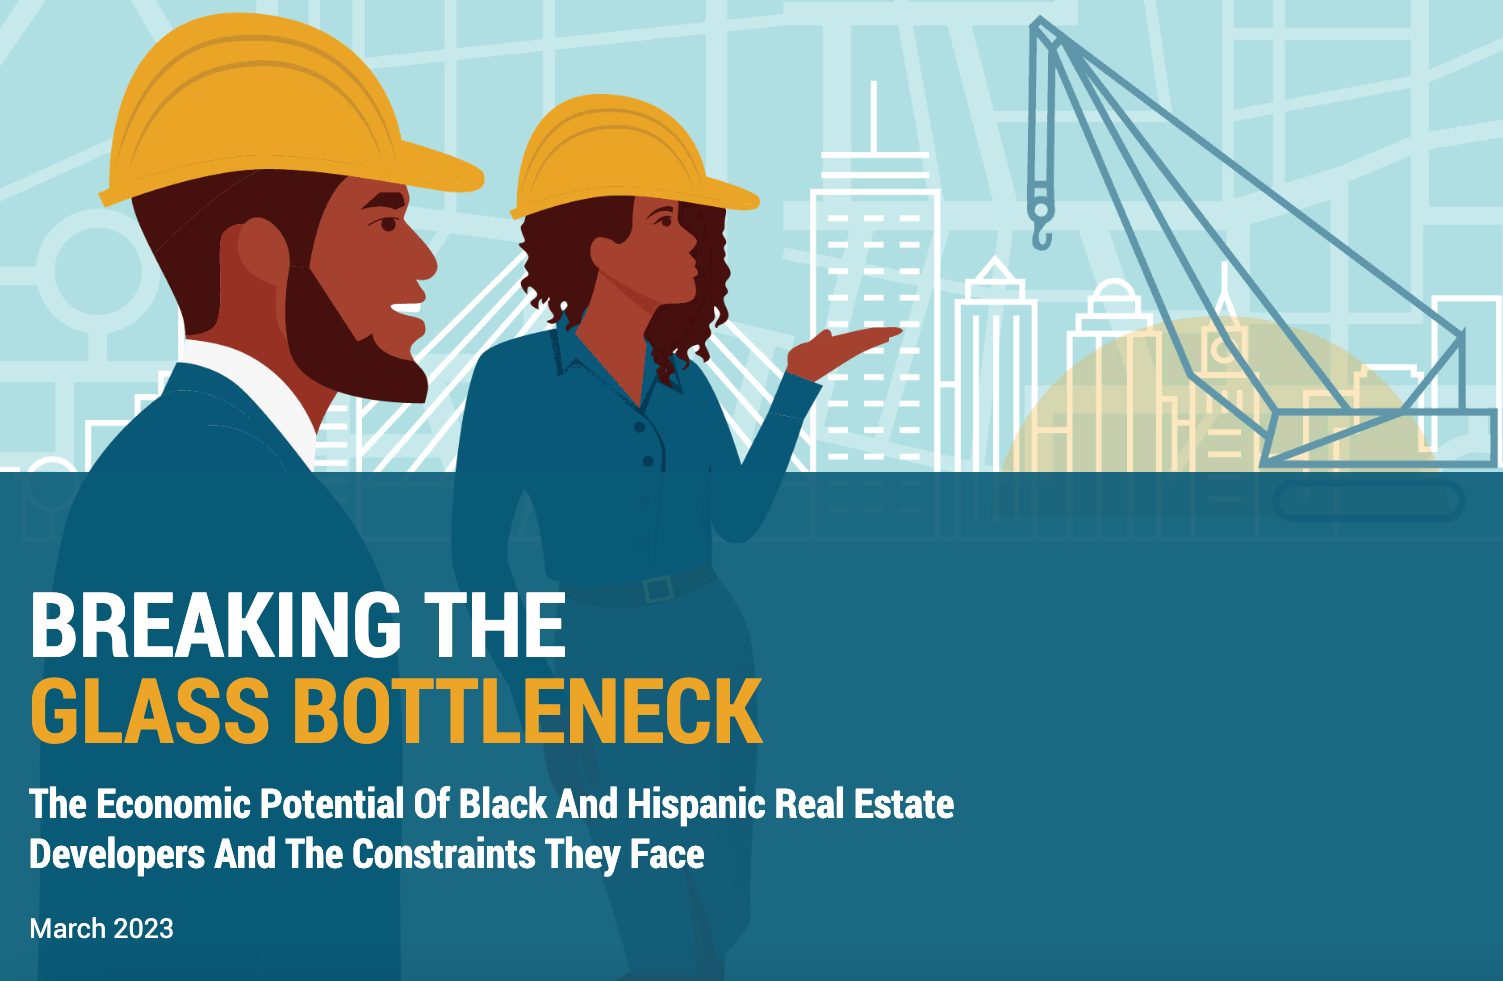 Report: $106B in business revenue could be unshackled if stakeholders remove barriers for Black real estate developers